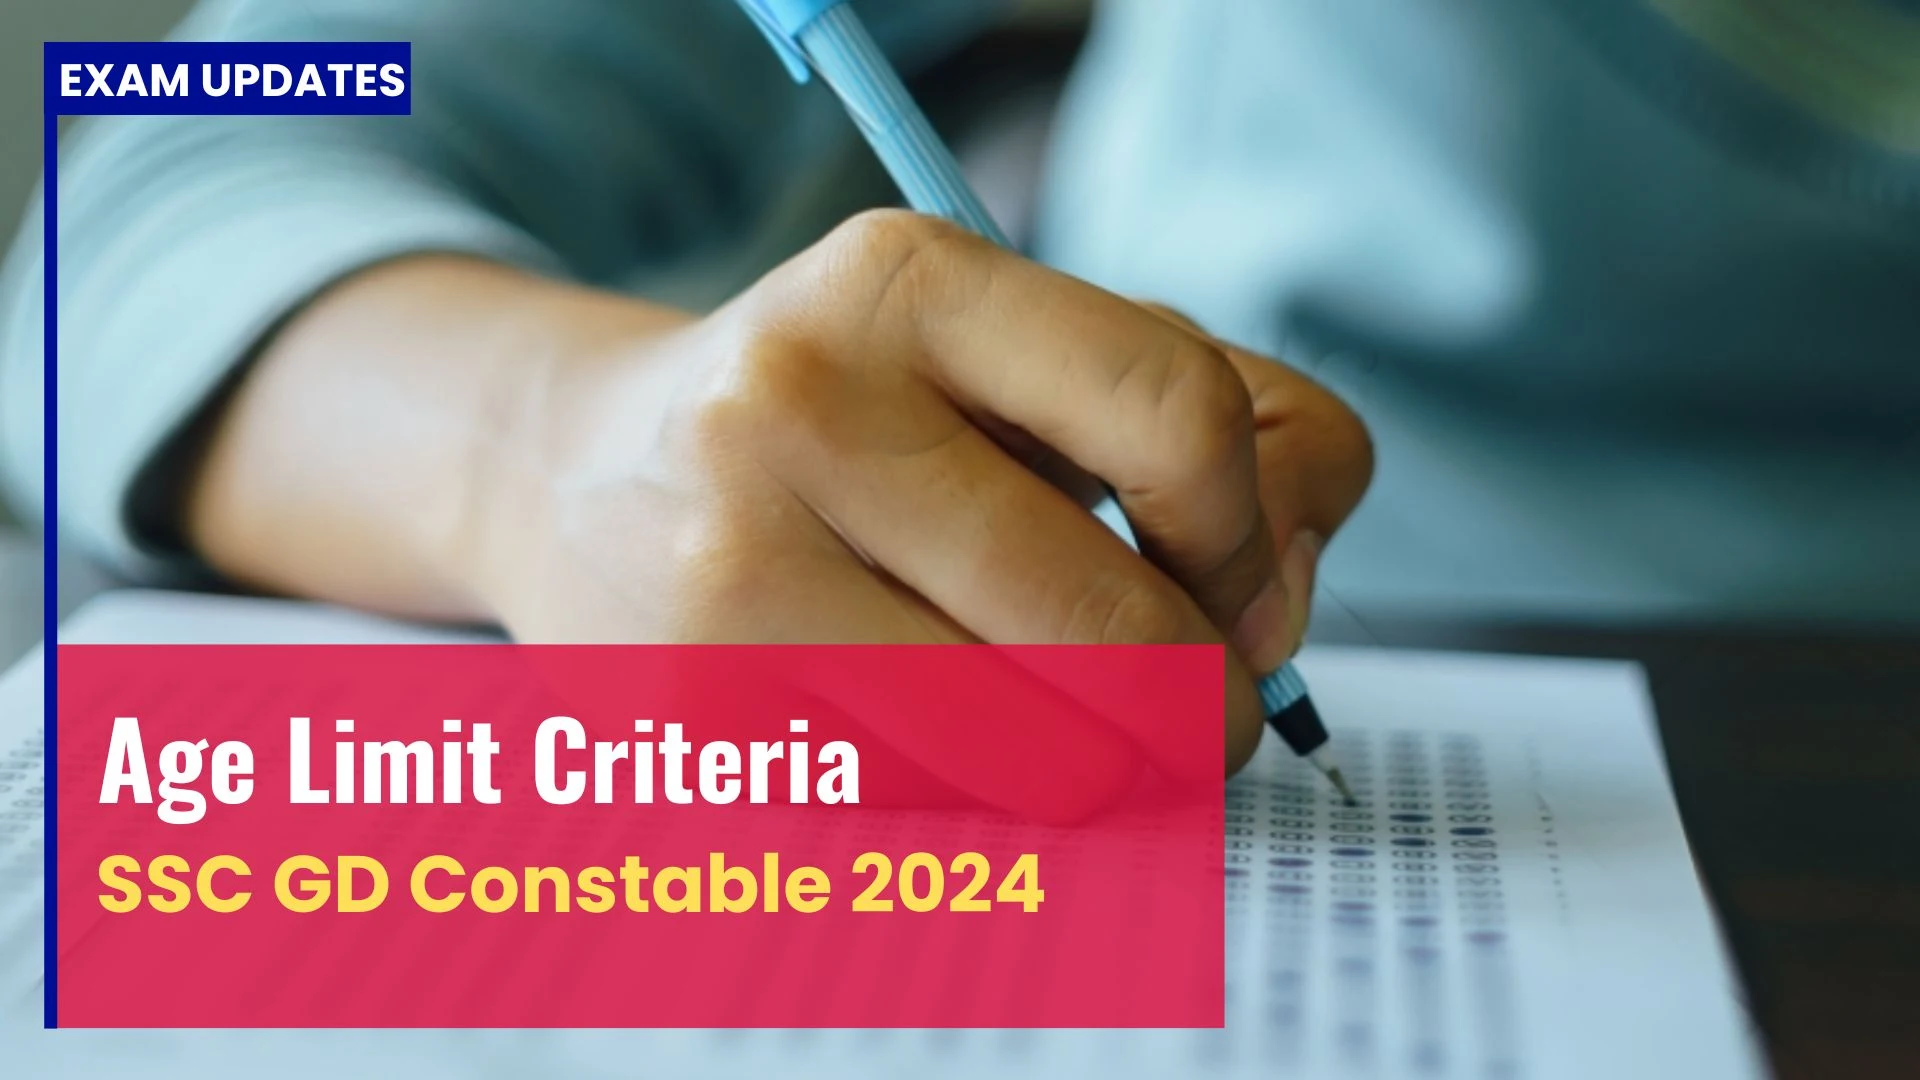 SSC GD Constable Age Limit 2024 Know Detailed Eligibility Criteria